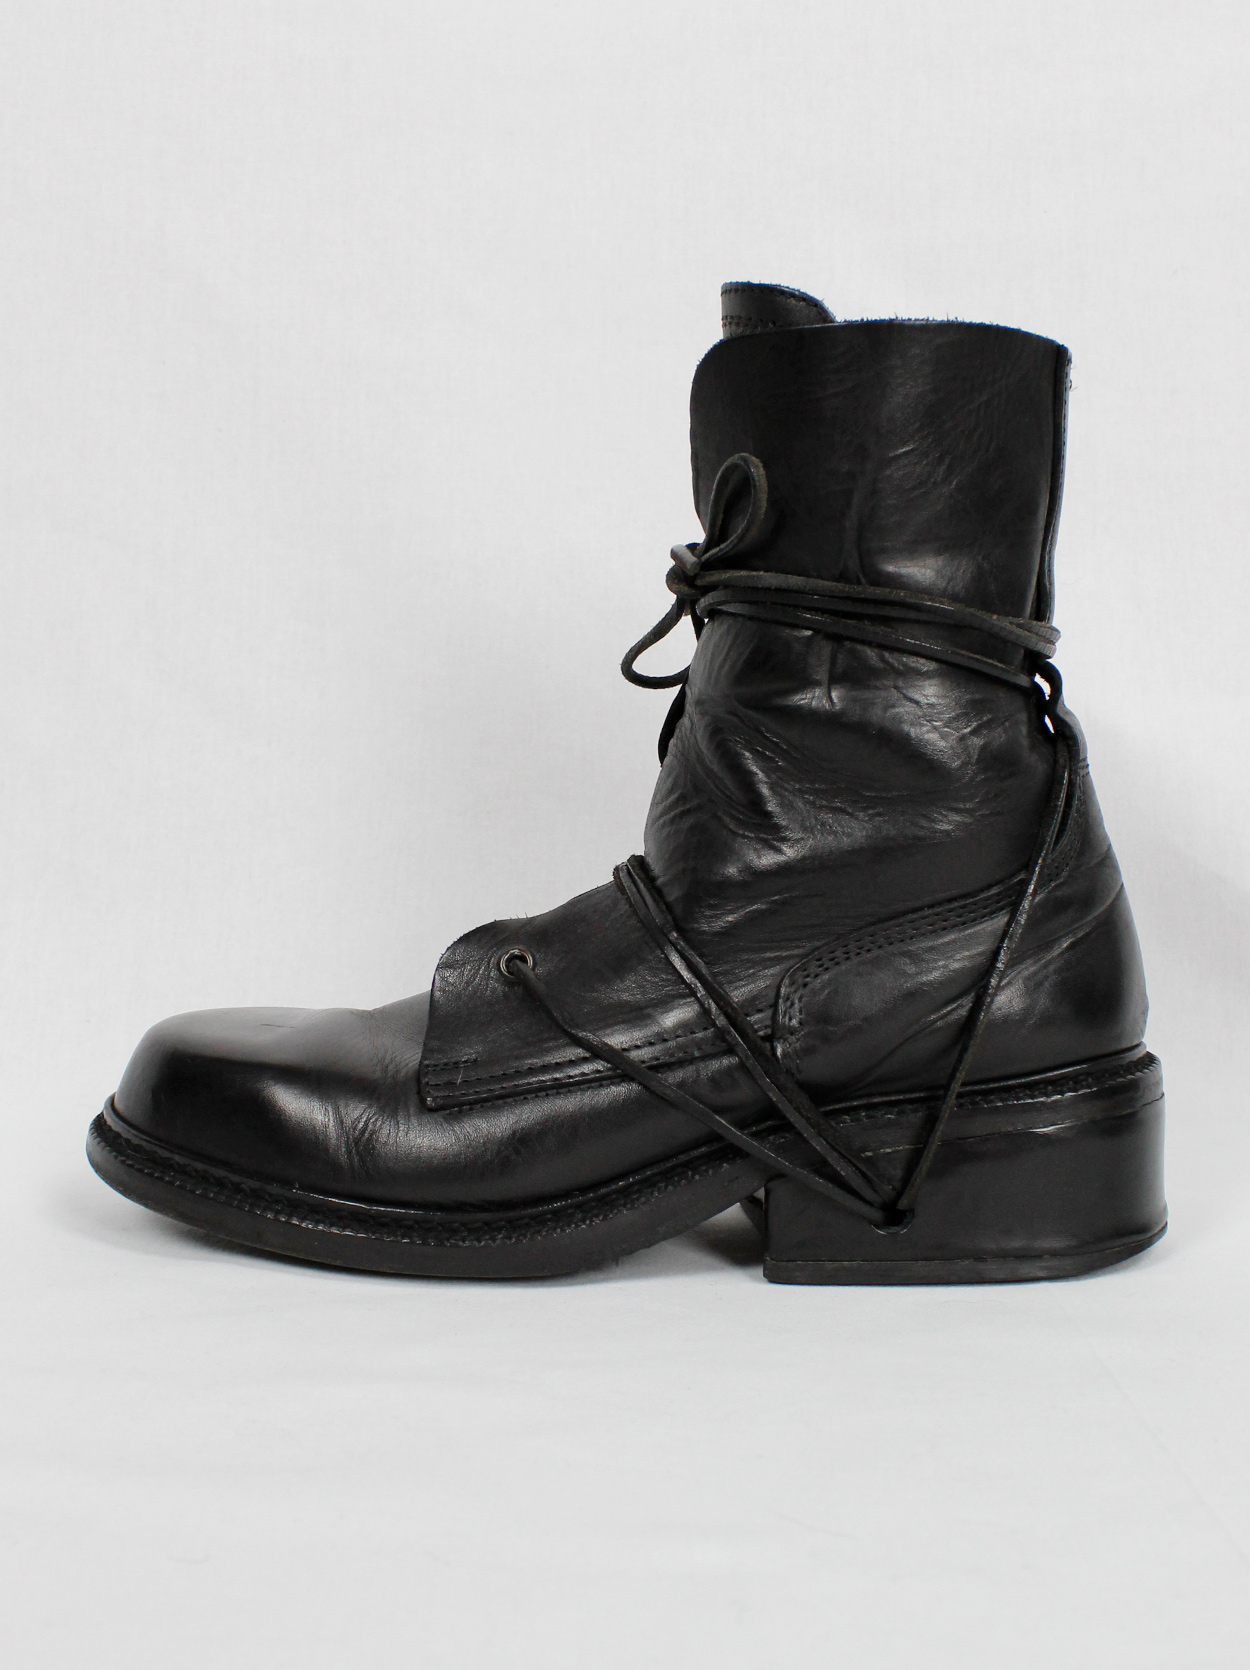 Dirk Bikkembergs black combat boots wrapped with laces through the ...